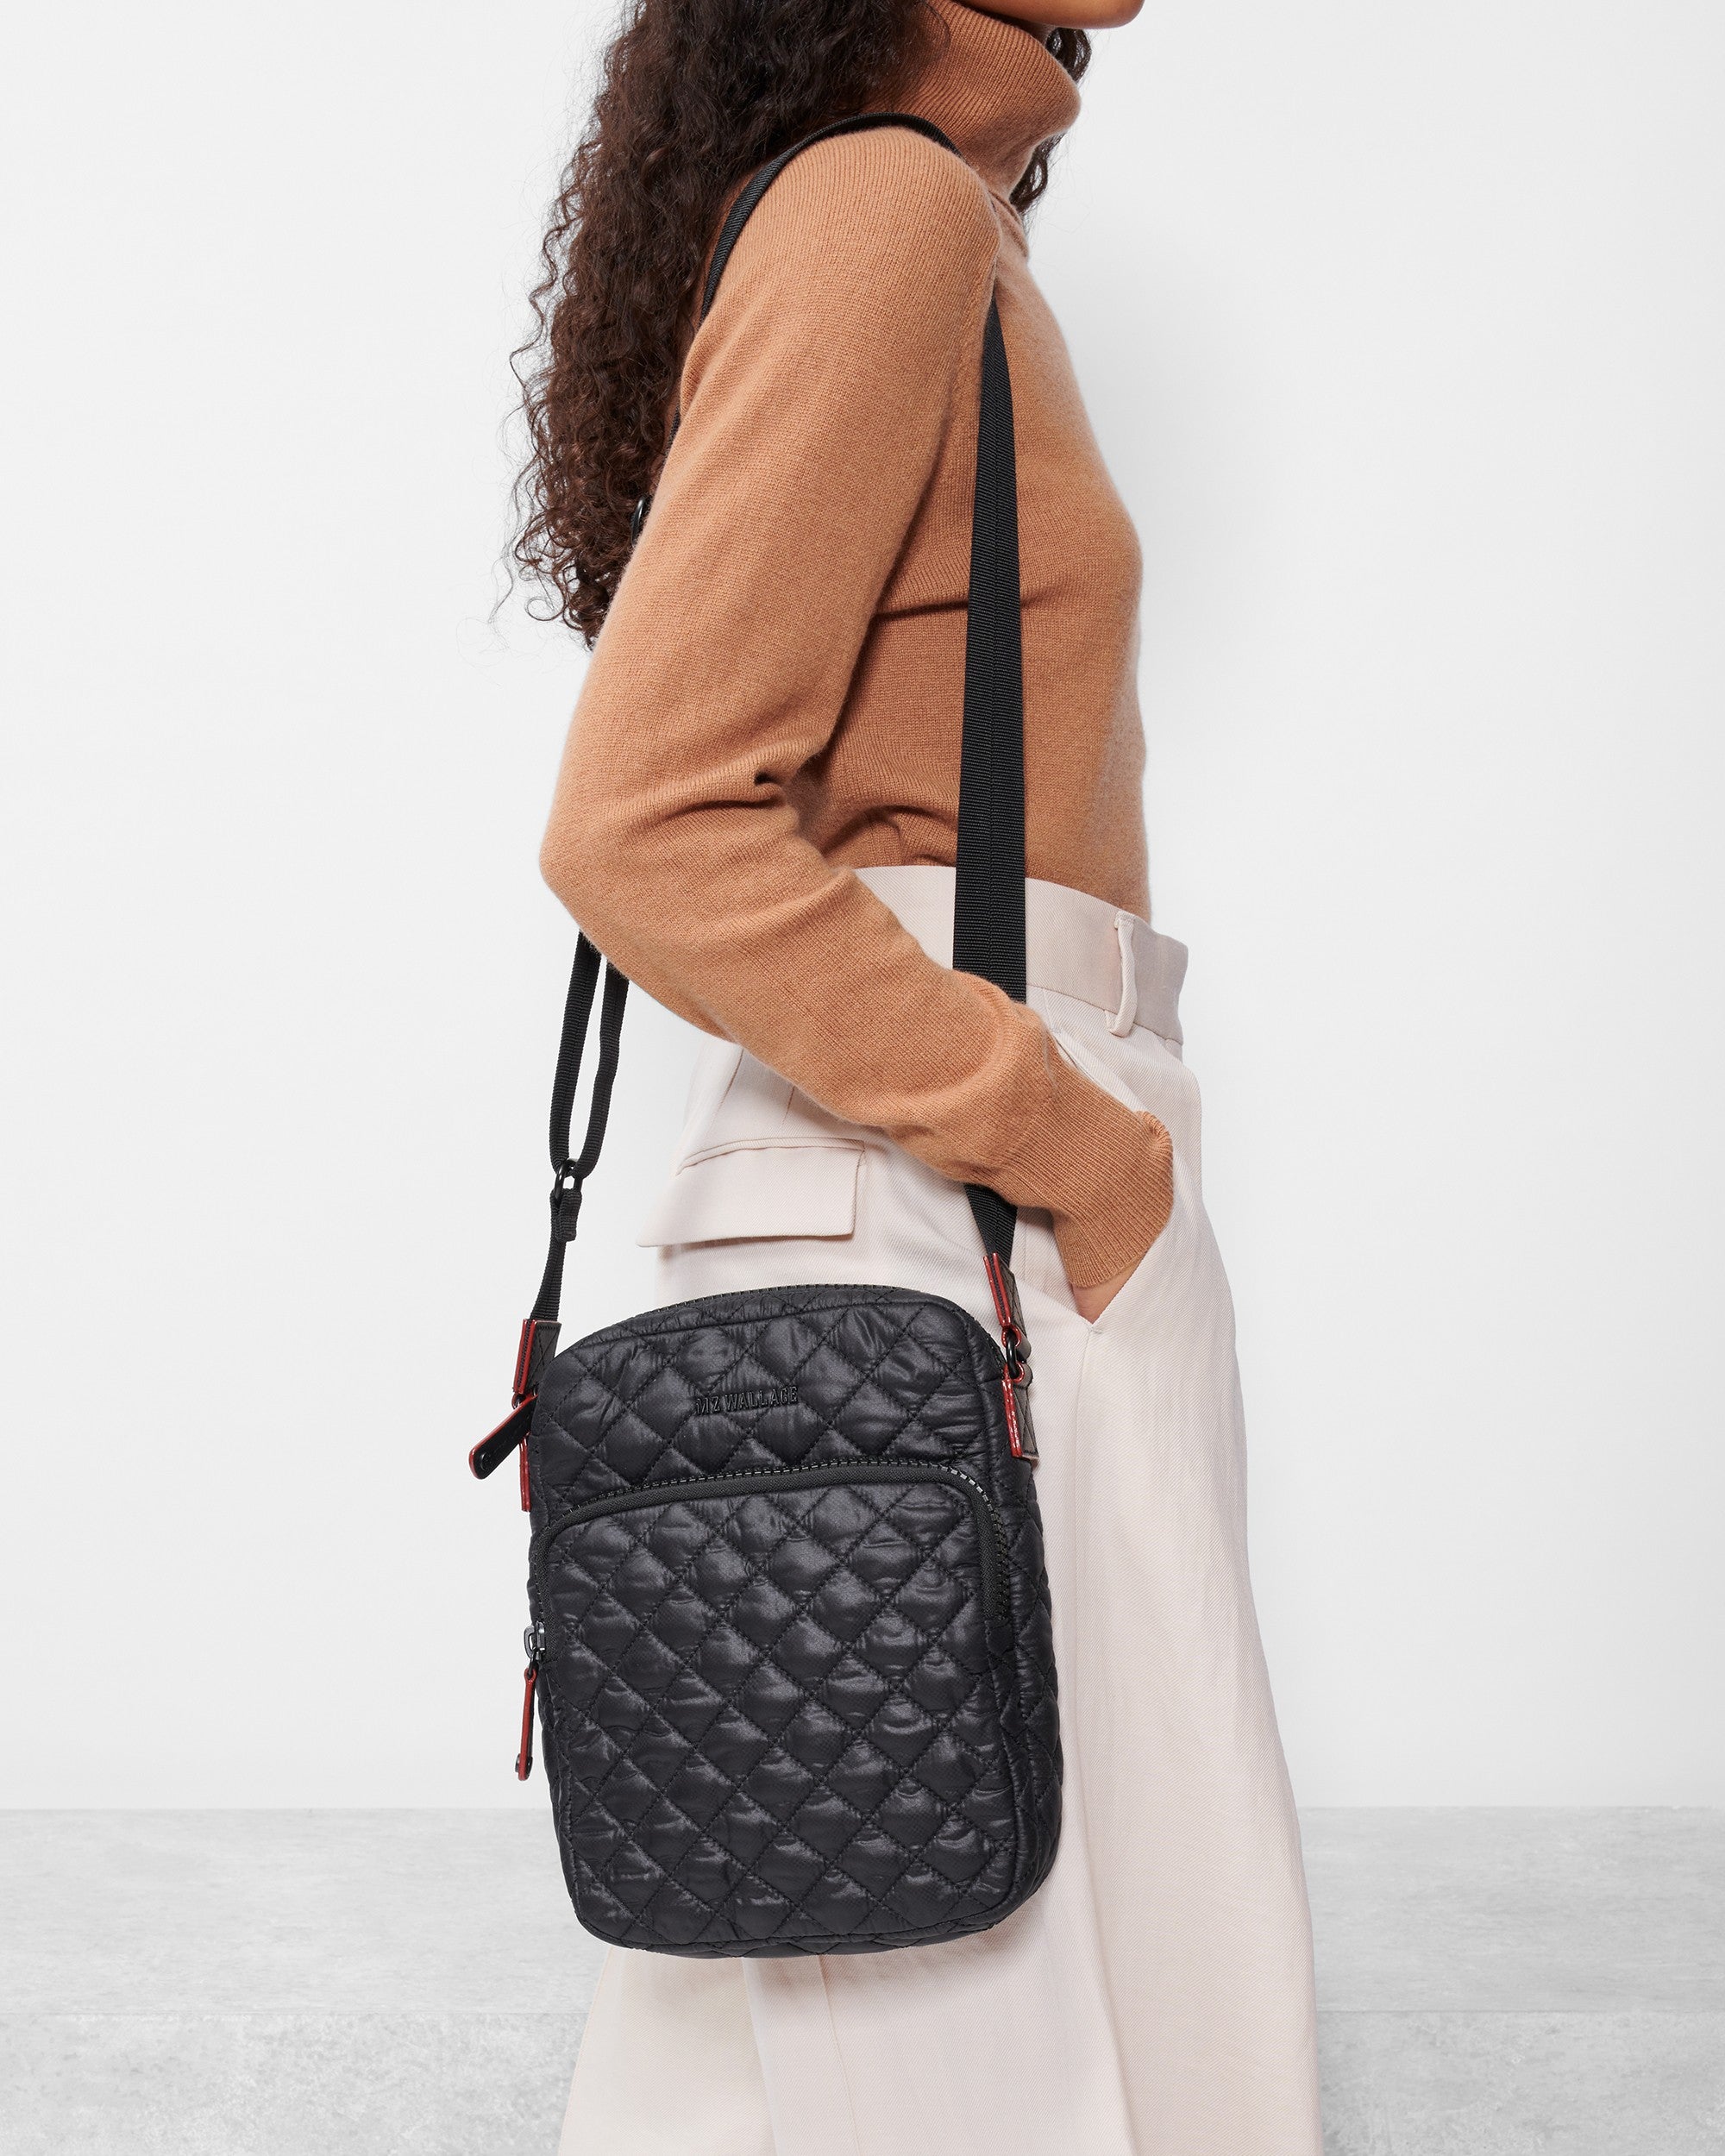 Large Metro Quilted Crossbody Bag in Black